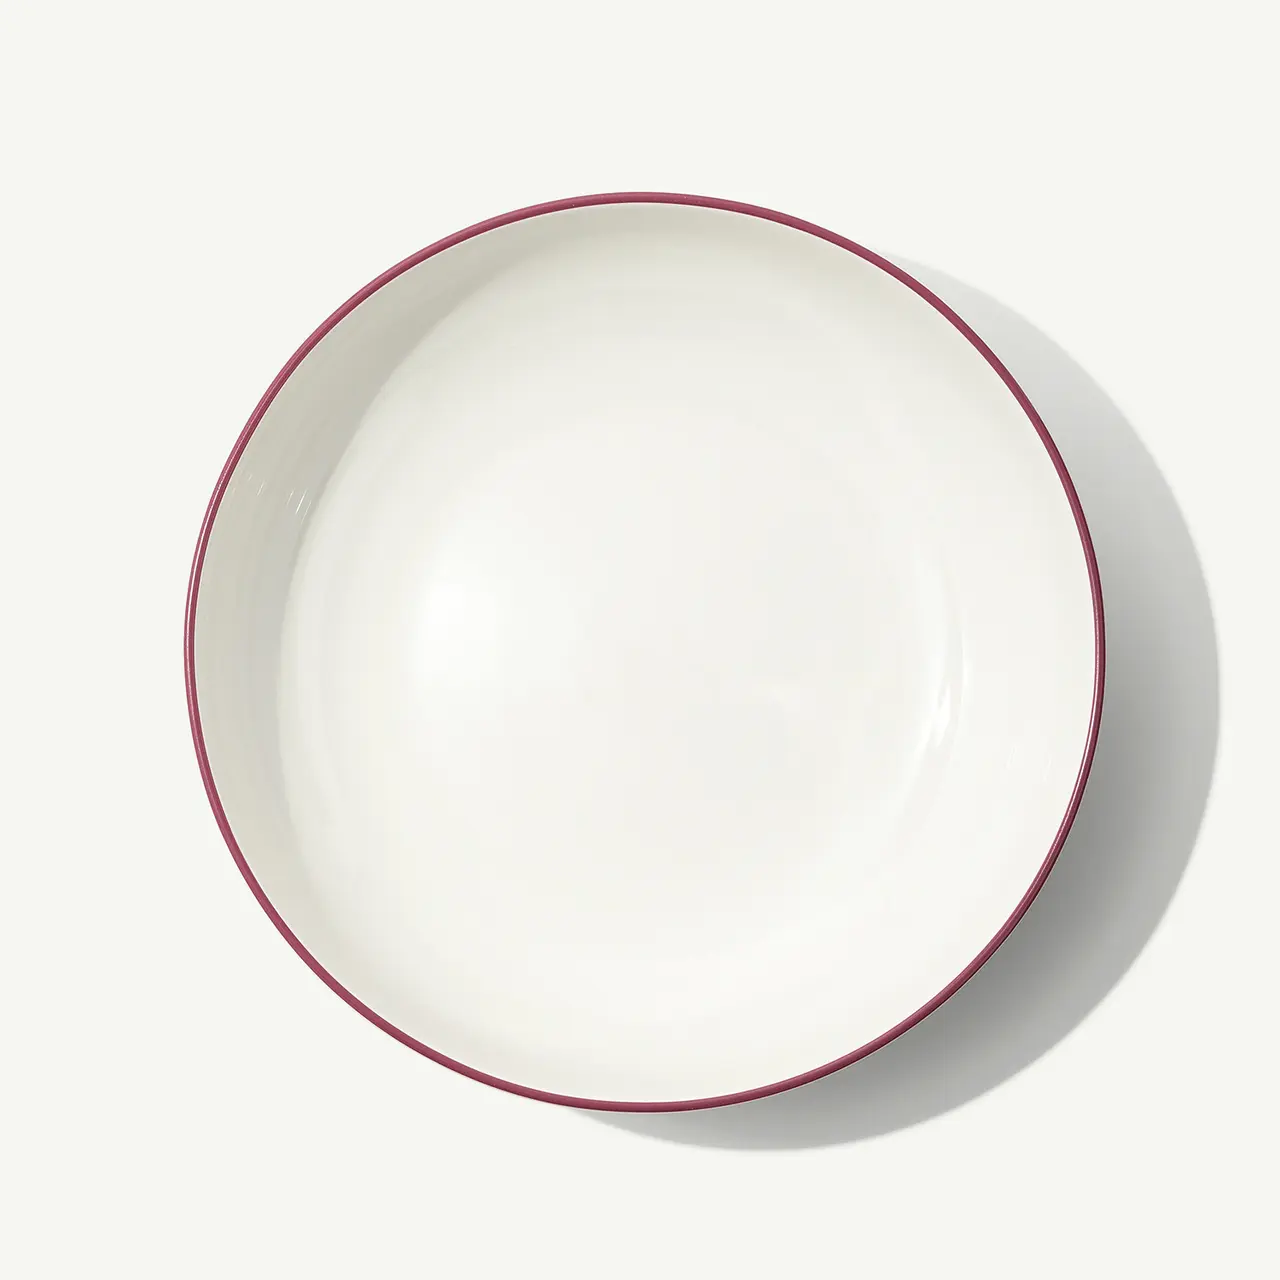 A white bowl with a red rim is centered on a plain background.